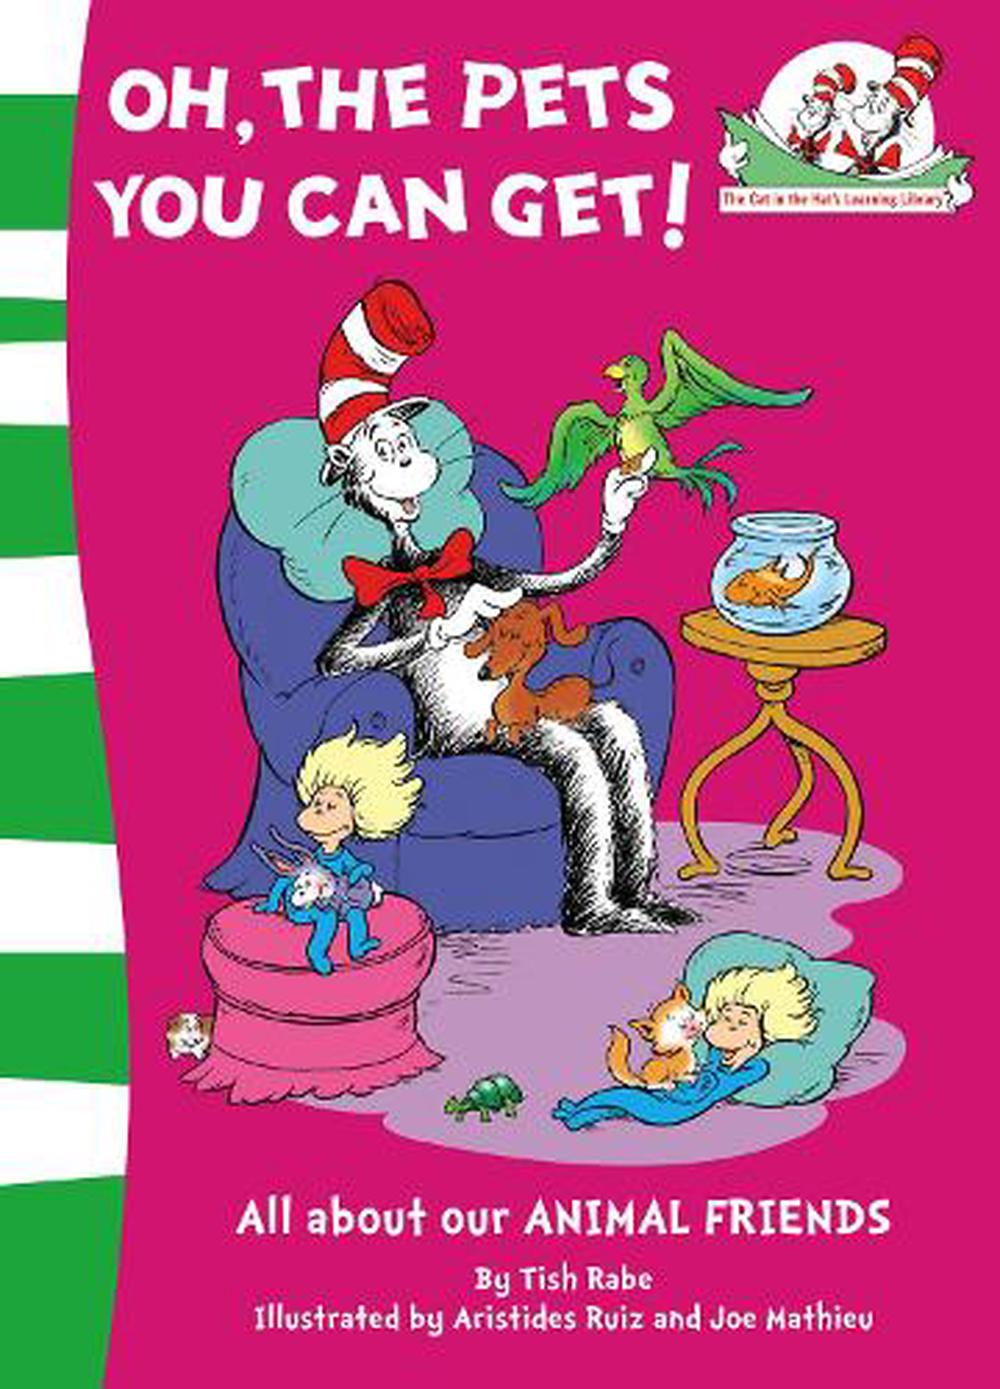 Oh, the Pets You Can Get! by Tish Rabe (English) Paperback Book Free ...